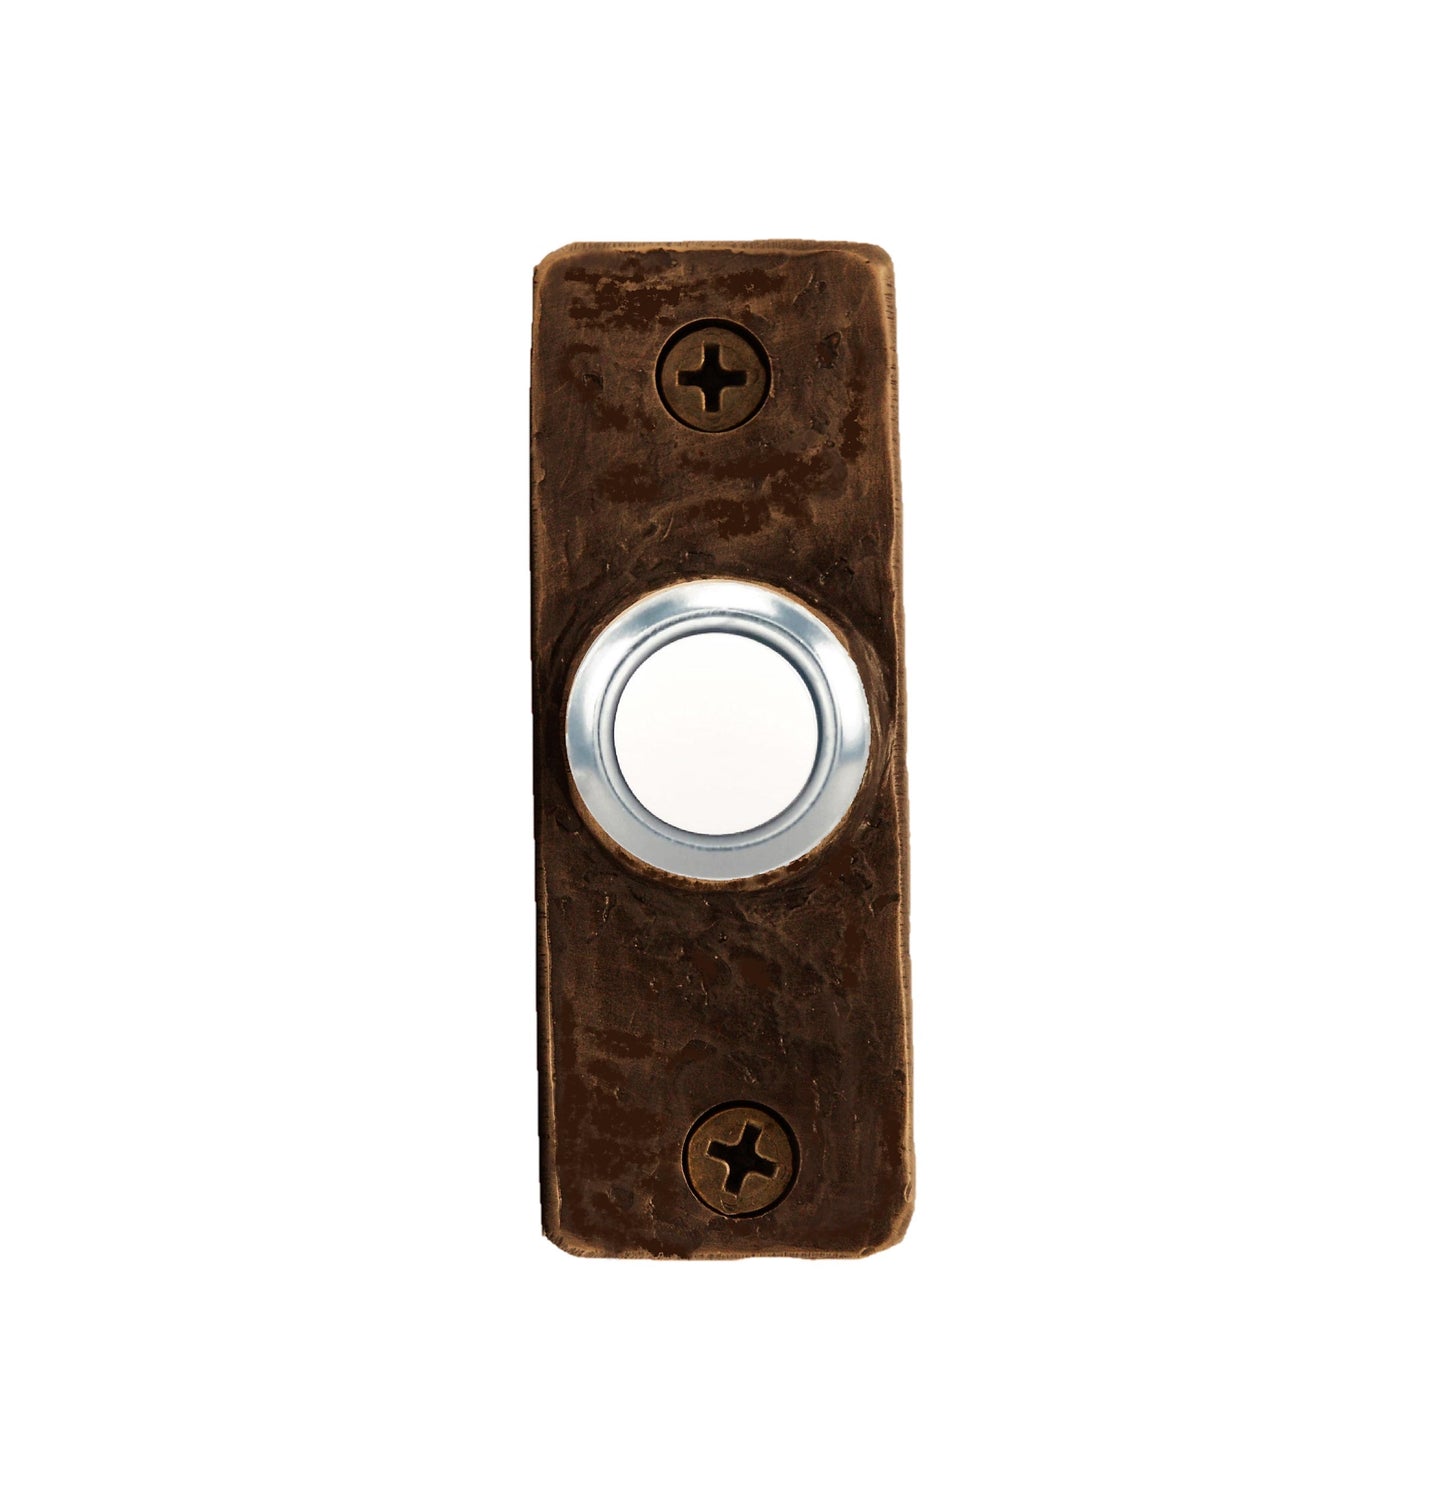 Extra-slim bronze doorbell - Classic with traditional patina